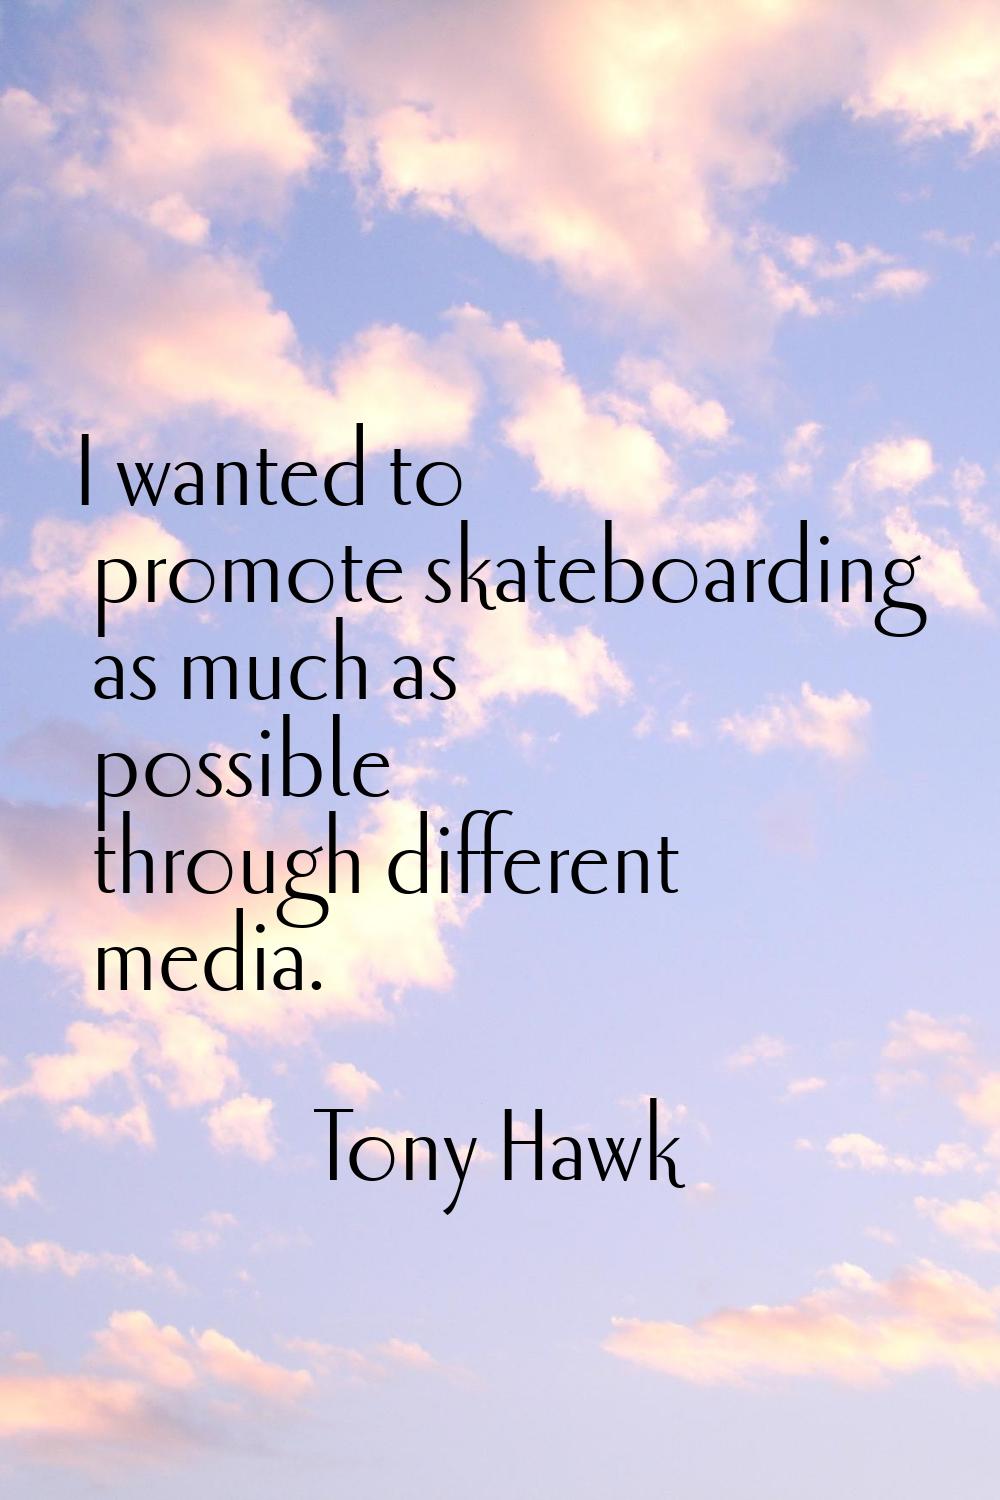 I wanted to promote skateboarding as much as possible through different media.